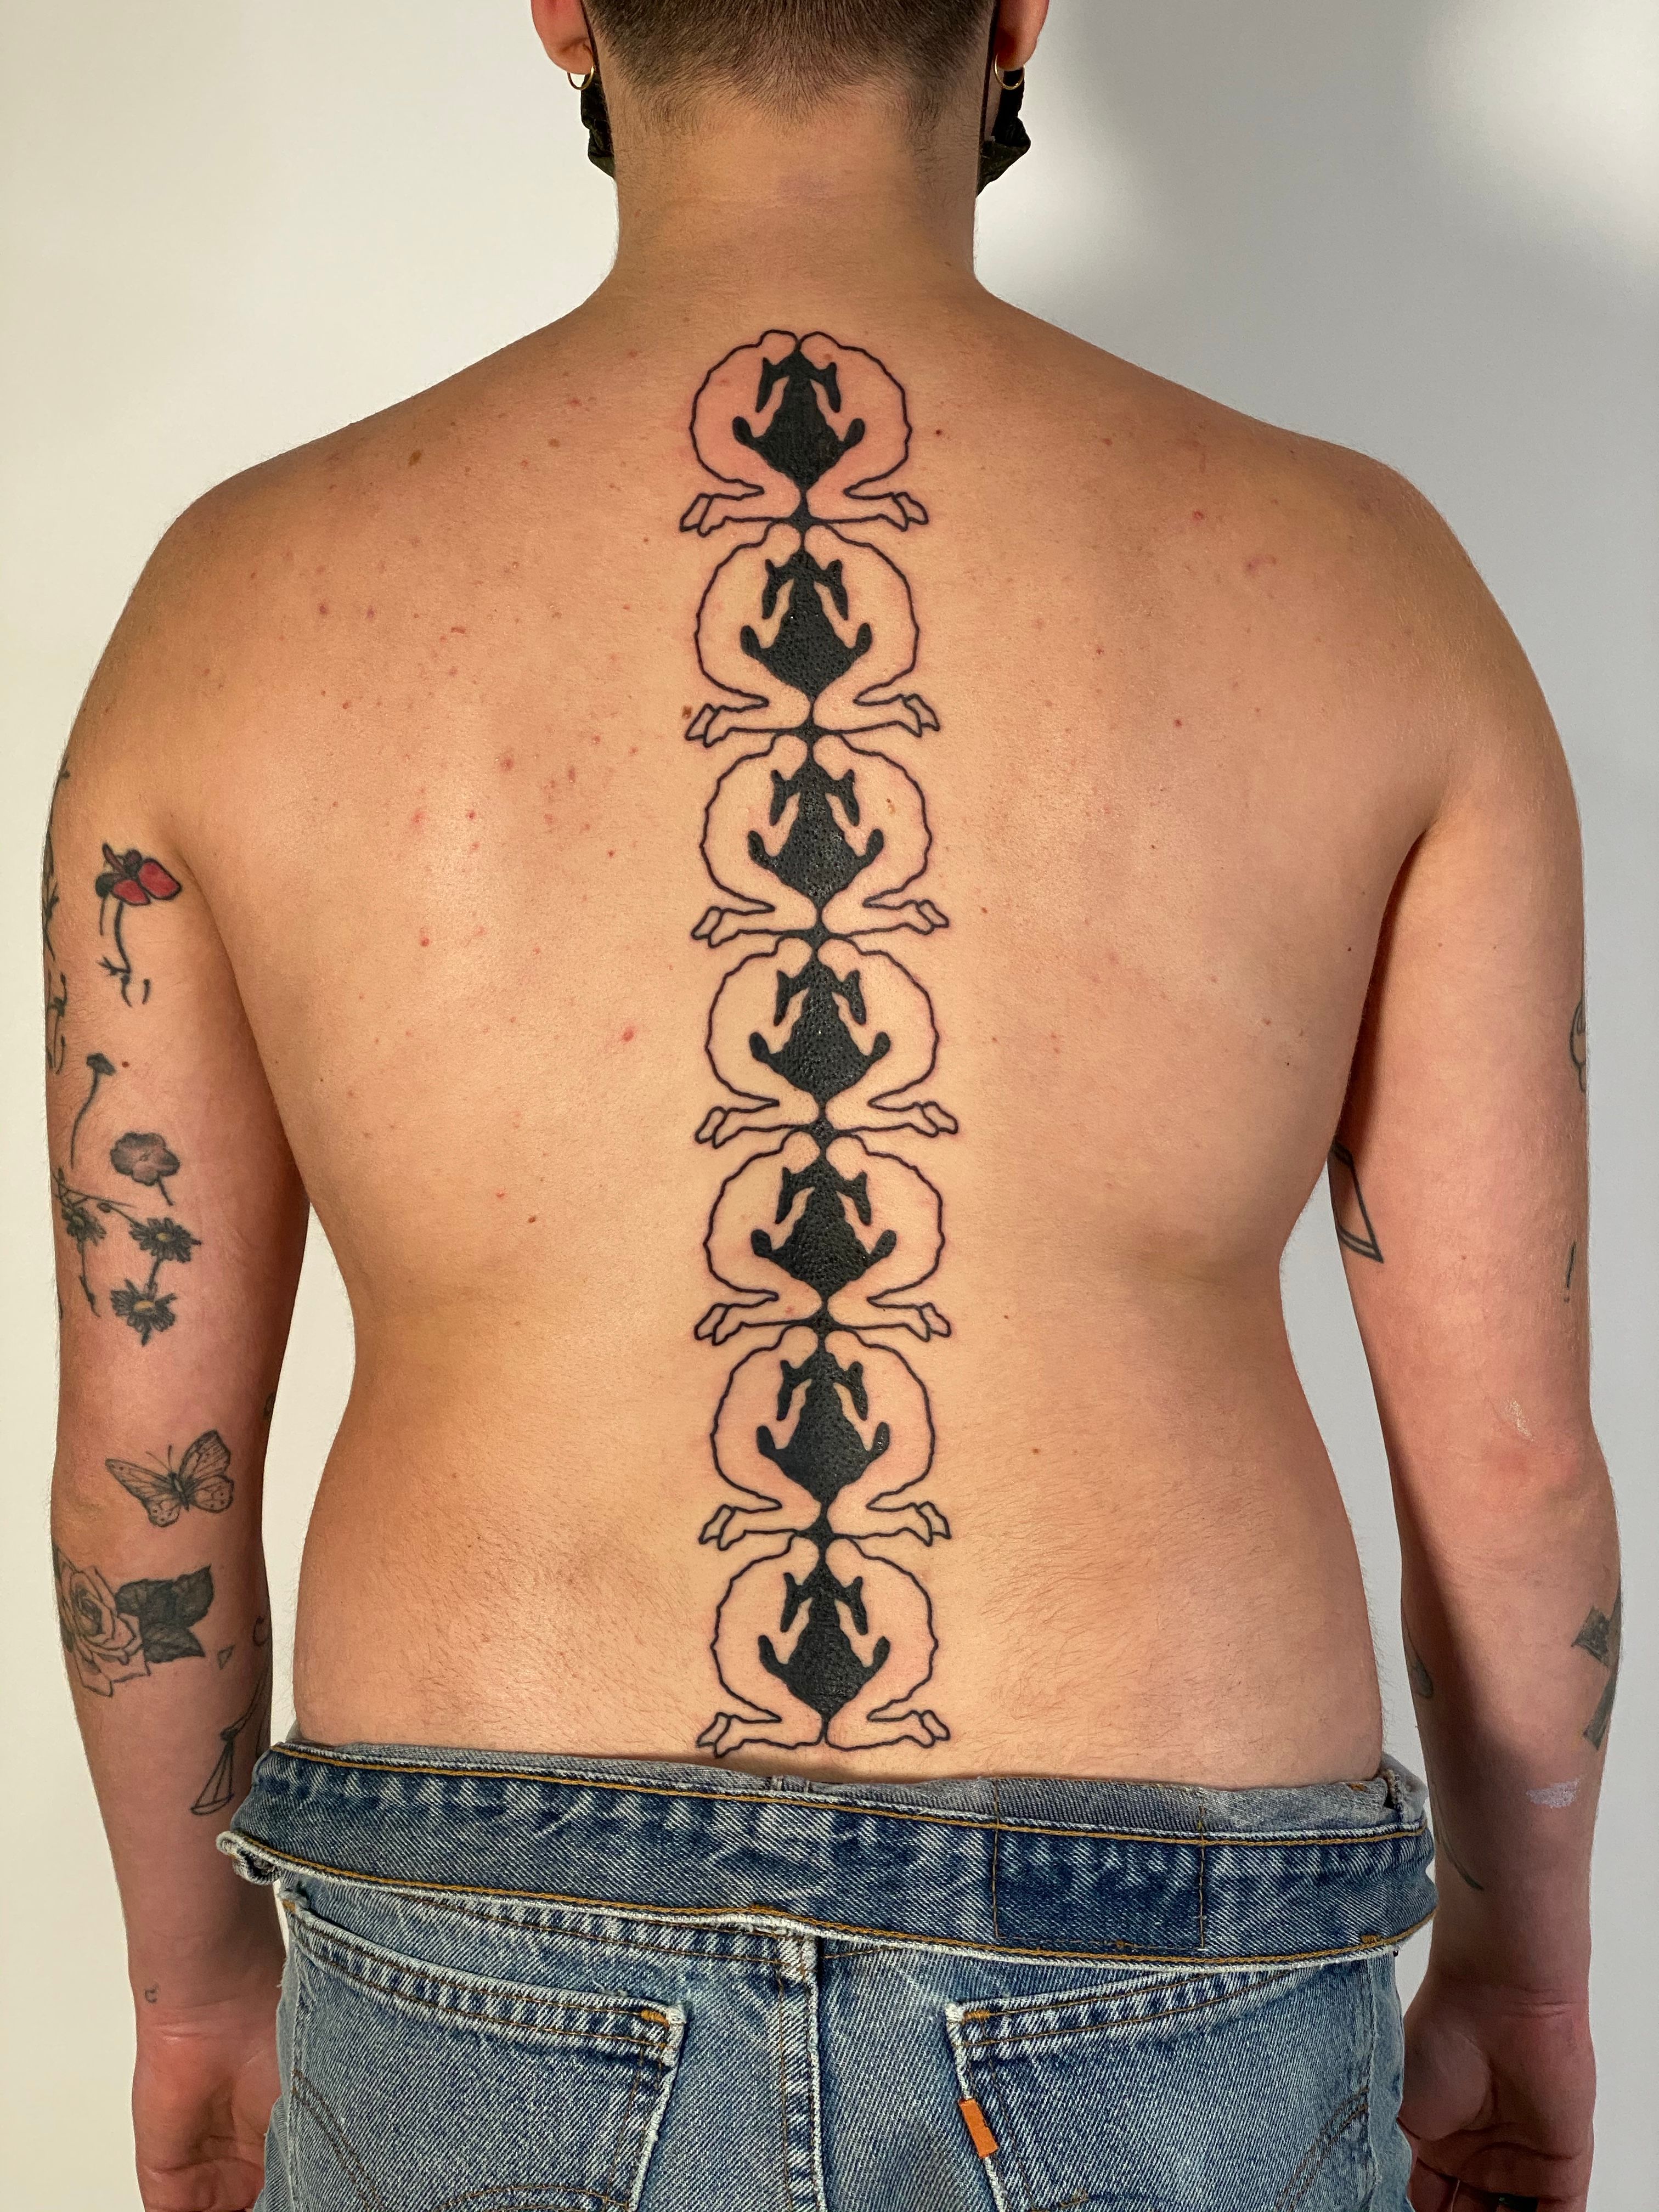 Tattoos for men | Inkster – Page 3